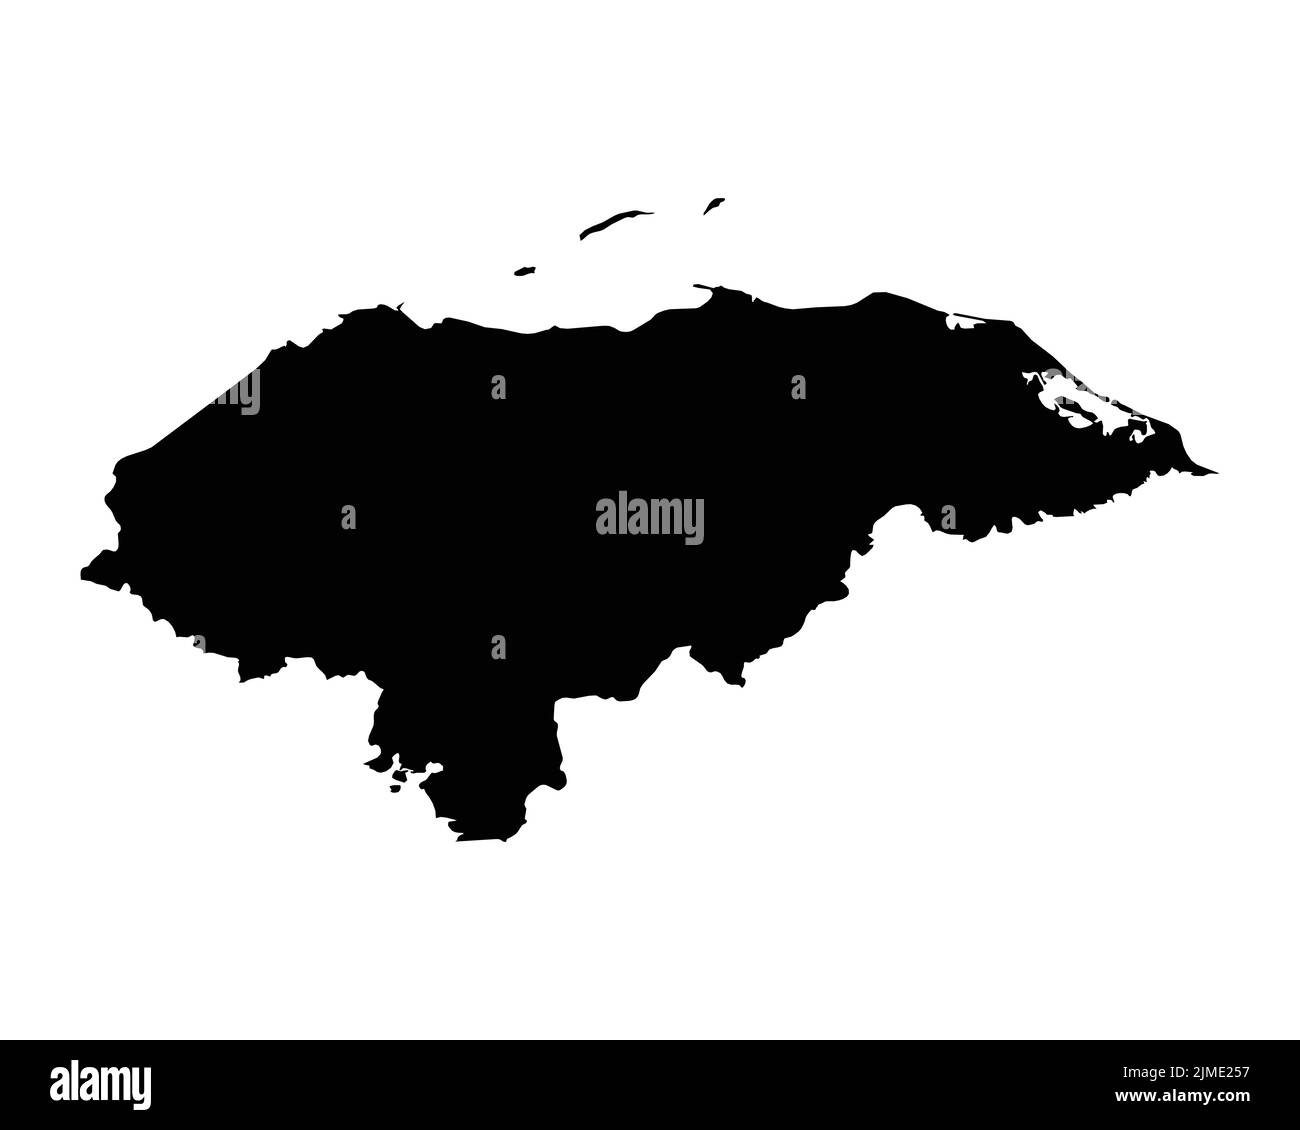 Honduras Map. Honduran Country Map. Black and White National Nation Outline Geography Border Boundary Shape Territory Vector Illustration EPS Clipart Stock Vector